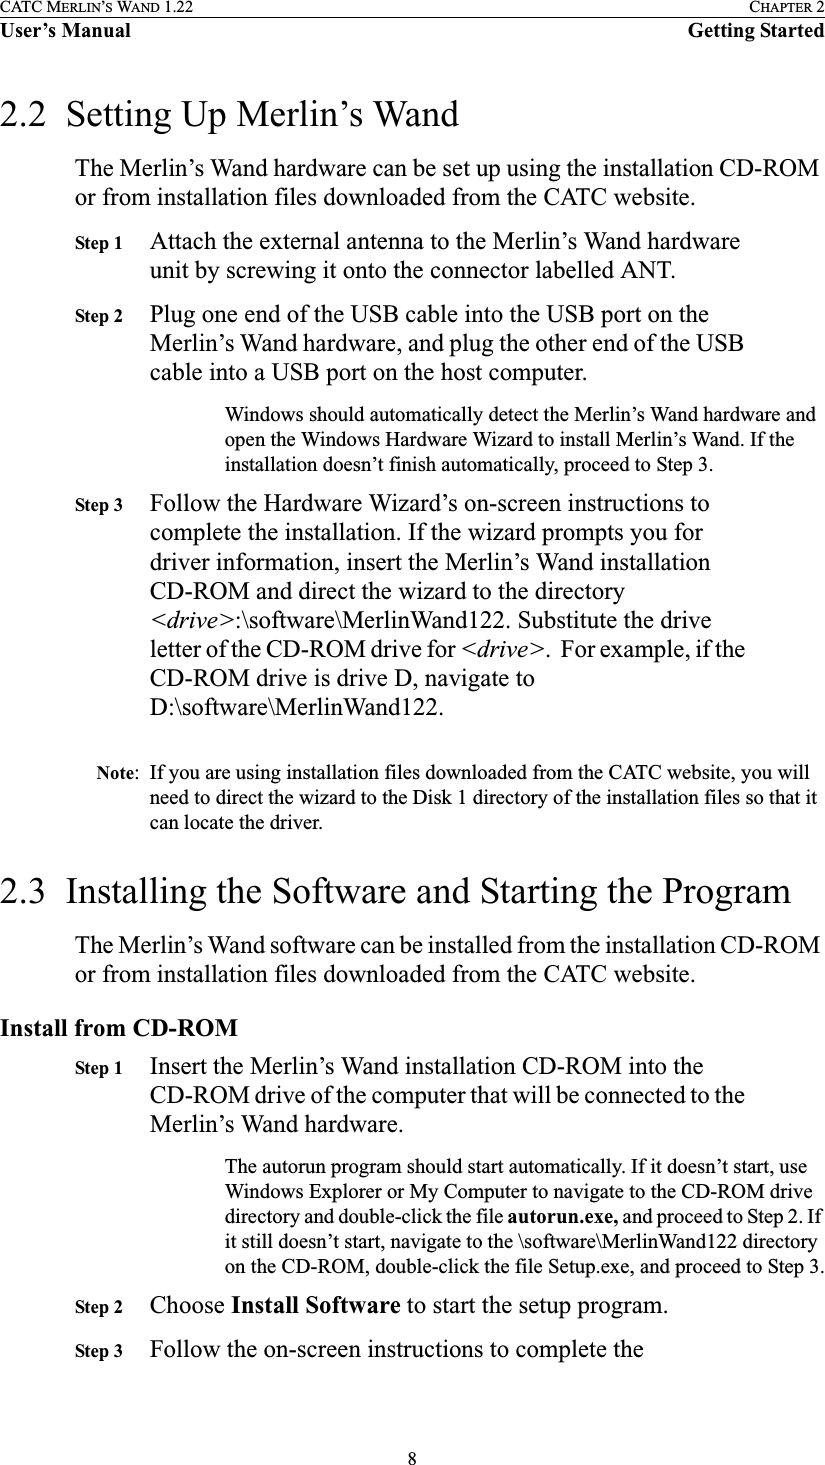 8CATC MERLIN’S WAND 1.22 CHAPTER 2User’s Manual Getting Started2.2  Setting Up Merlin’s WandThe Merlin’s Wand hardware can be set up using the installation CD-ROM or from installation files downloaded from the CATC website.Step 1 Attach the external antenna to the Merlin’s Wand hardware unit by screwing it onto the connector labelled ANT.Step 2 Plug one end of the USB cable into the USB port on the Merlin’s Wand hardware, and plug the other end of the USB cable into a USB port on the host computer.Windows should automatically detect the Merlin’s Wand hardware and open the Windows Hardware Wizard to install Merlin’s Wand. If the installation doesn’t finish automatically, proceed to Step 3.Step 3 Follow the Hardware Wizard’s on-screen instructions to complete the installation. If the wizard prompts you for driver information, insert the Merlin’s Wand installation CD-ROM and direct the wizard to the directory &lt;drive&gt;:\software\MerlinWand122. Substitute the drive letter of the CD-ROM drive for &lt;drive&gt;.  For example, if the CD-ROM drive is drive D, navigate to D:\software\MerlinWand122.Note: If you are using installation files downloaded from the CATC website, you will need to direct the wizard to the Disk 1 directory of the installation files so that it can locate the driver.2.3  Installing the Software and Starting the ProgramThe Merlin’s Wand software can be installed from the installation CD-ROM or from installation files downloaded from the CATC website.Install from CD-ROMStep 1 Insert the Merlin’s Wand installation CD-ROM into the CD-ROM drive of the computer that will be connected to the Merlin’s Wand hardware.The autorun program should start automatically. If it doesn’t start, use Windows Explorer or My Computer to navigate to the CD-ROM drive directory and double-click the file autorun.exe, and proceed to Step 2. If it still doesn’t start, navigate to the \software\MerlinWand122 directory on the CD-ROM, double-click the file Setup.exe, and proceed to Step 3.Step 2 Choose Install Software to start the setup program.Step 3 Follow the on-screen instructions to complete the 